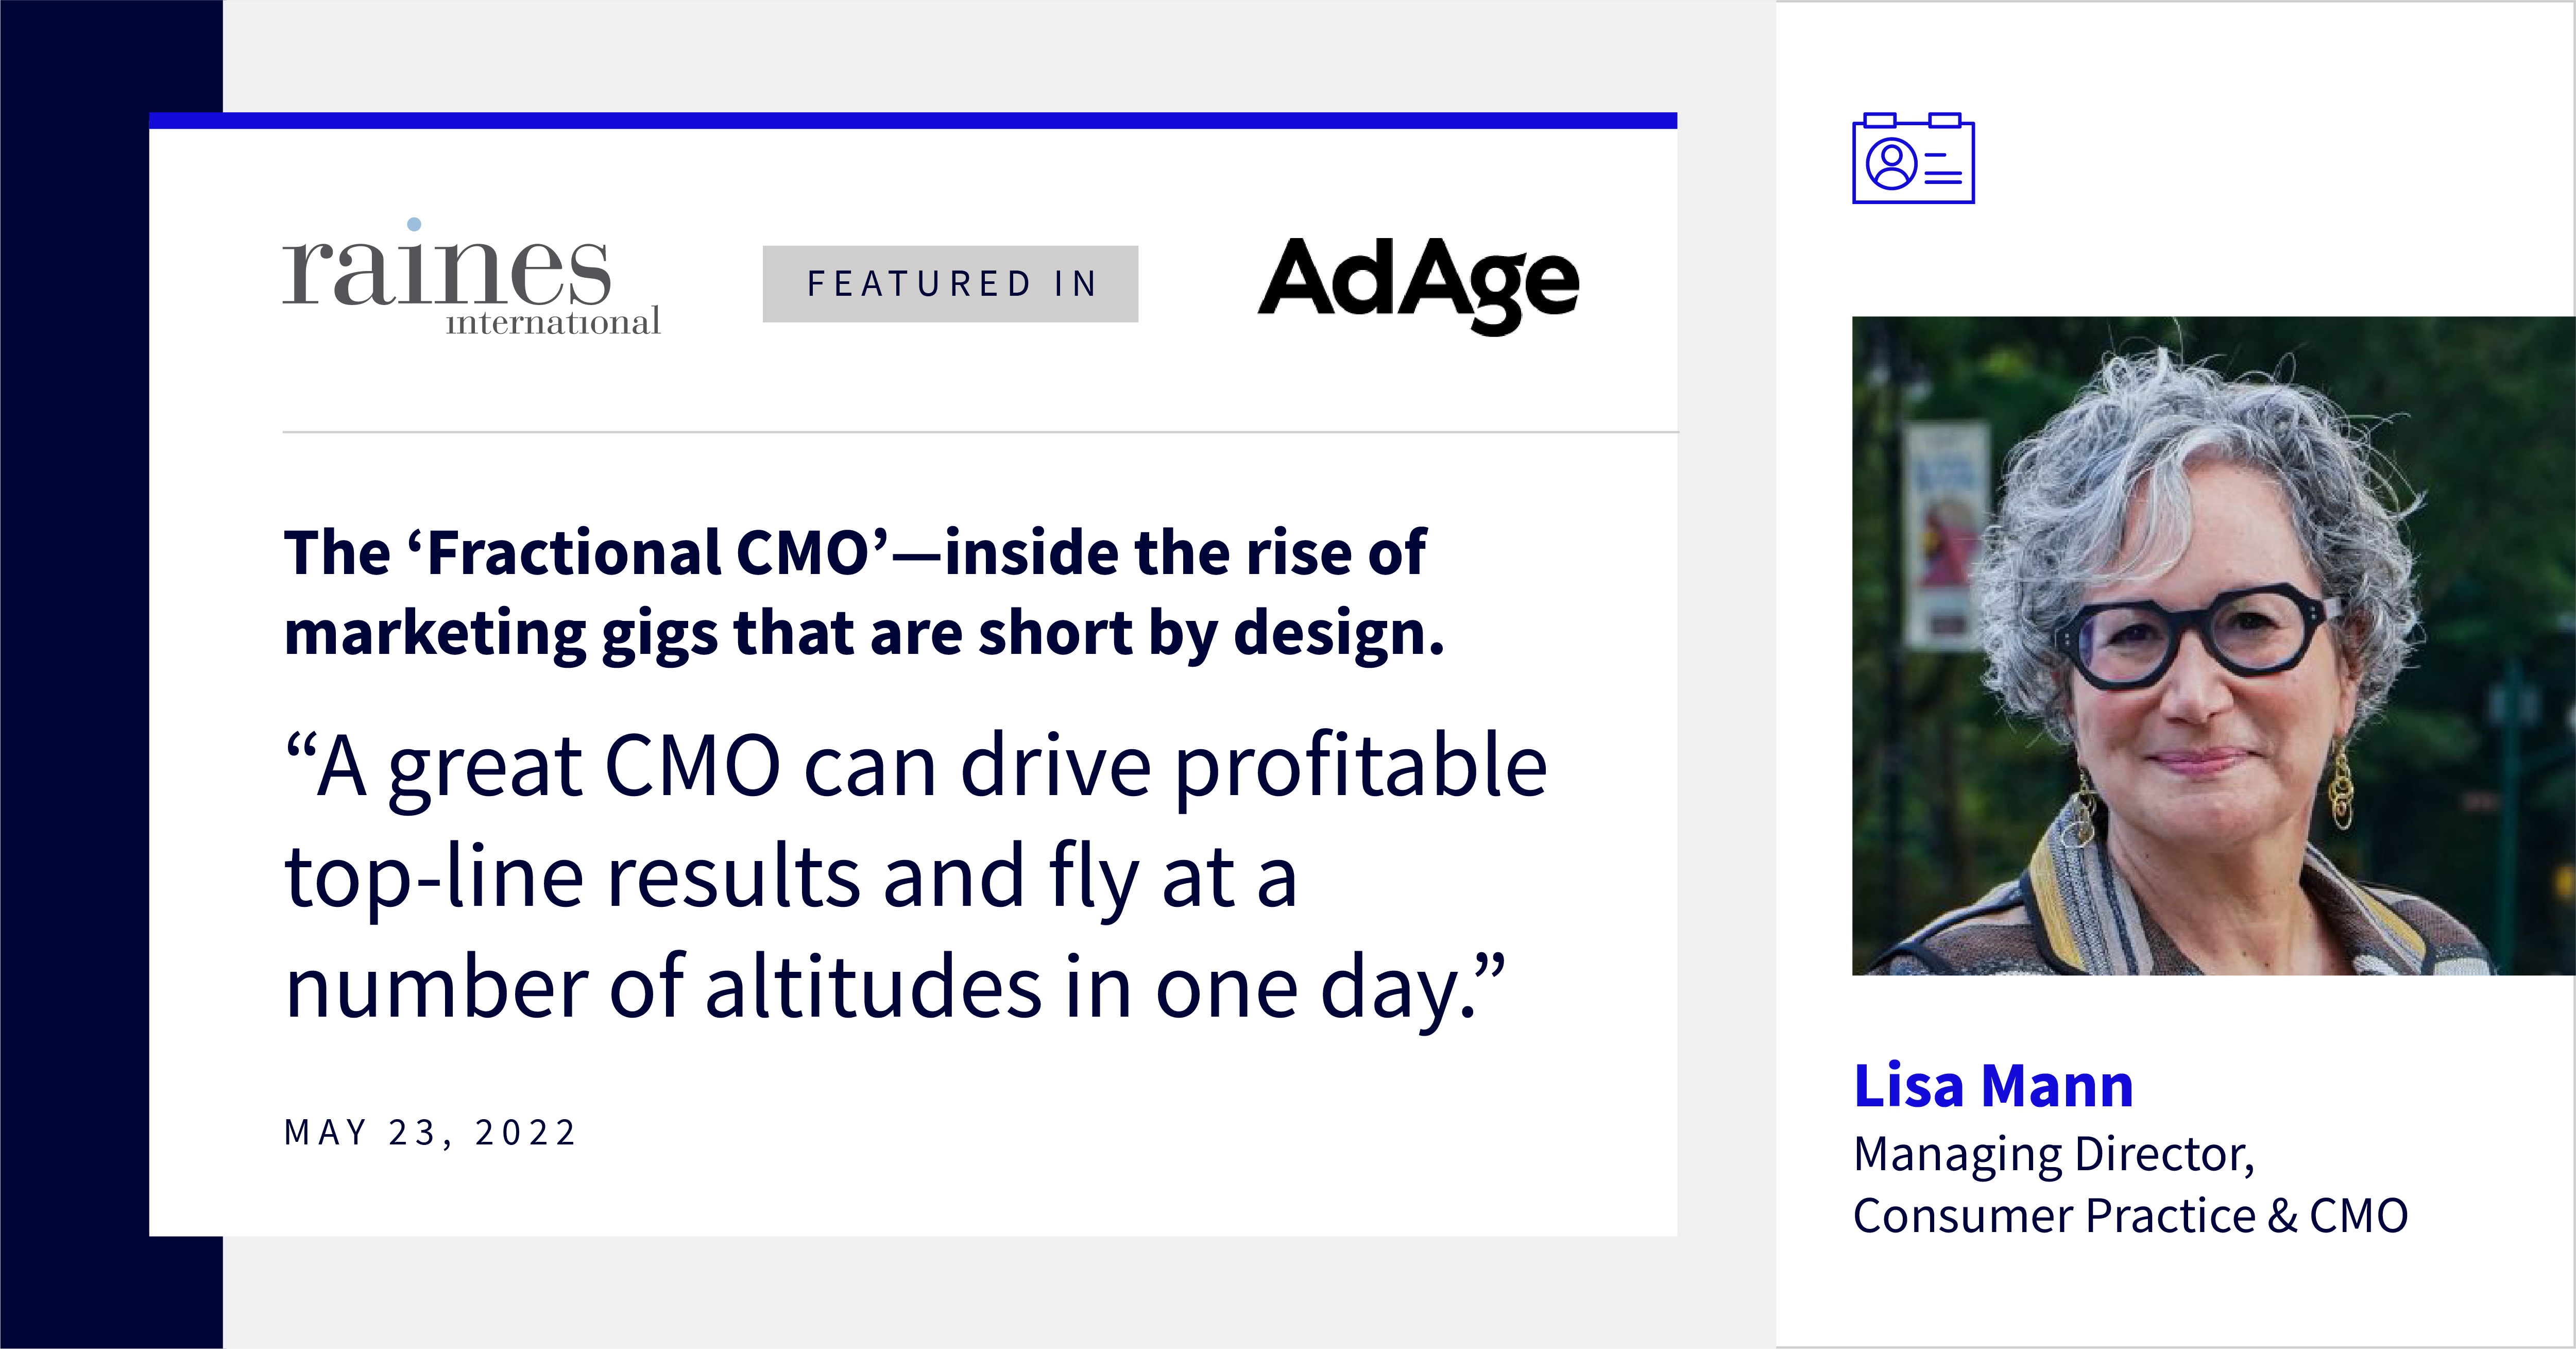 Lisa Mann's quote in Ad Age